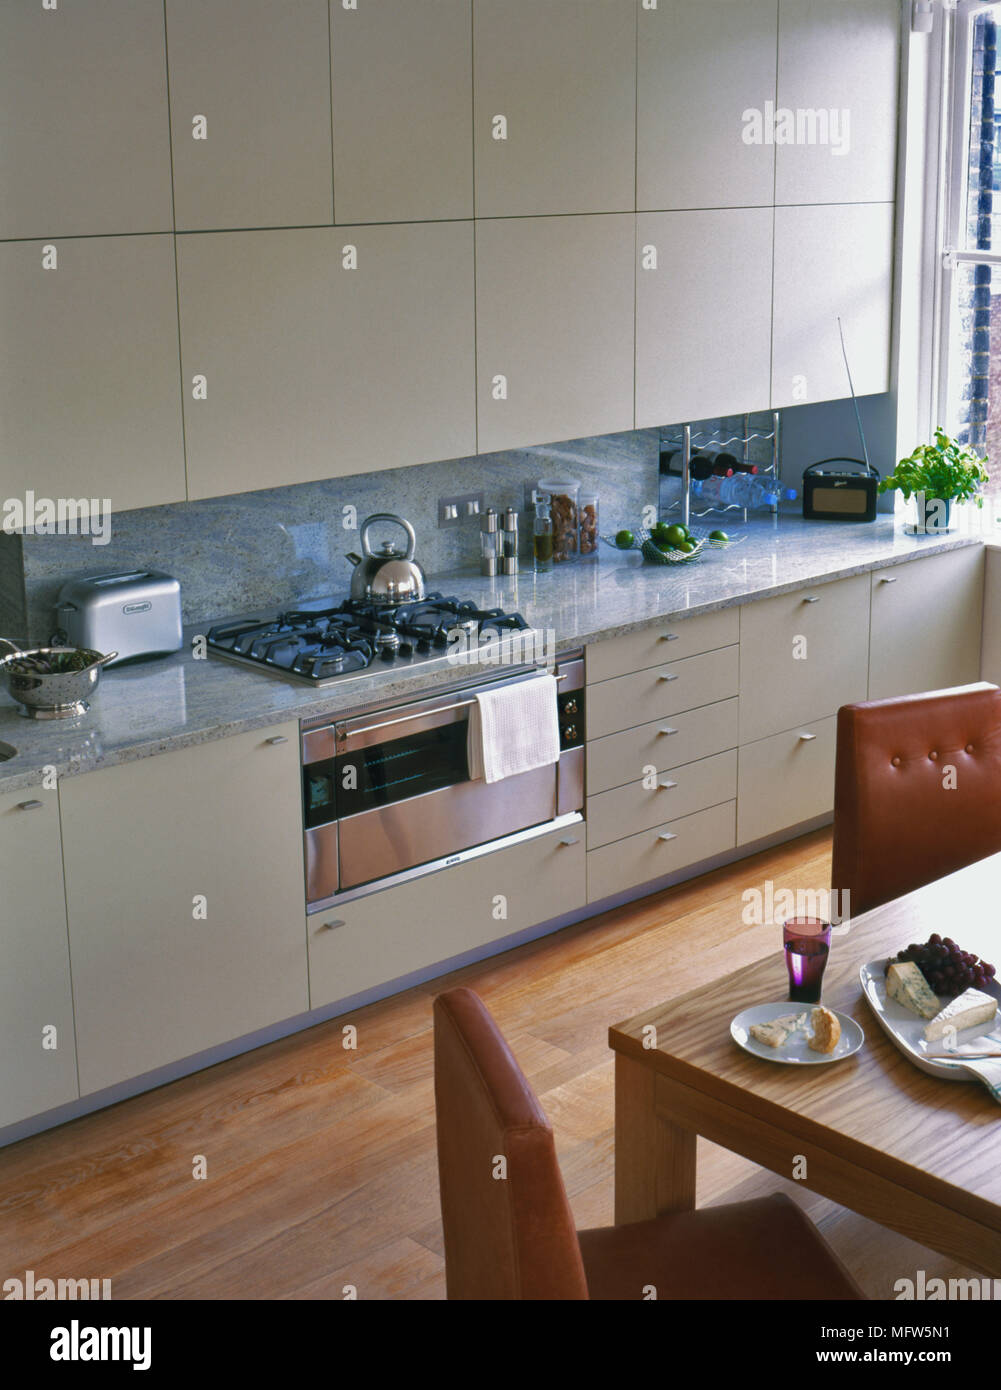 A modern kitchen with minimalist kitchen units above a stainless steel oven with a wooden kitchen table. Stock Photo